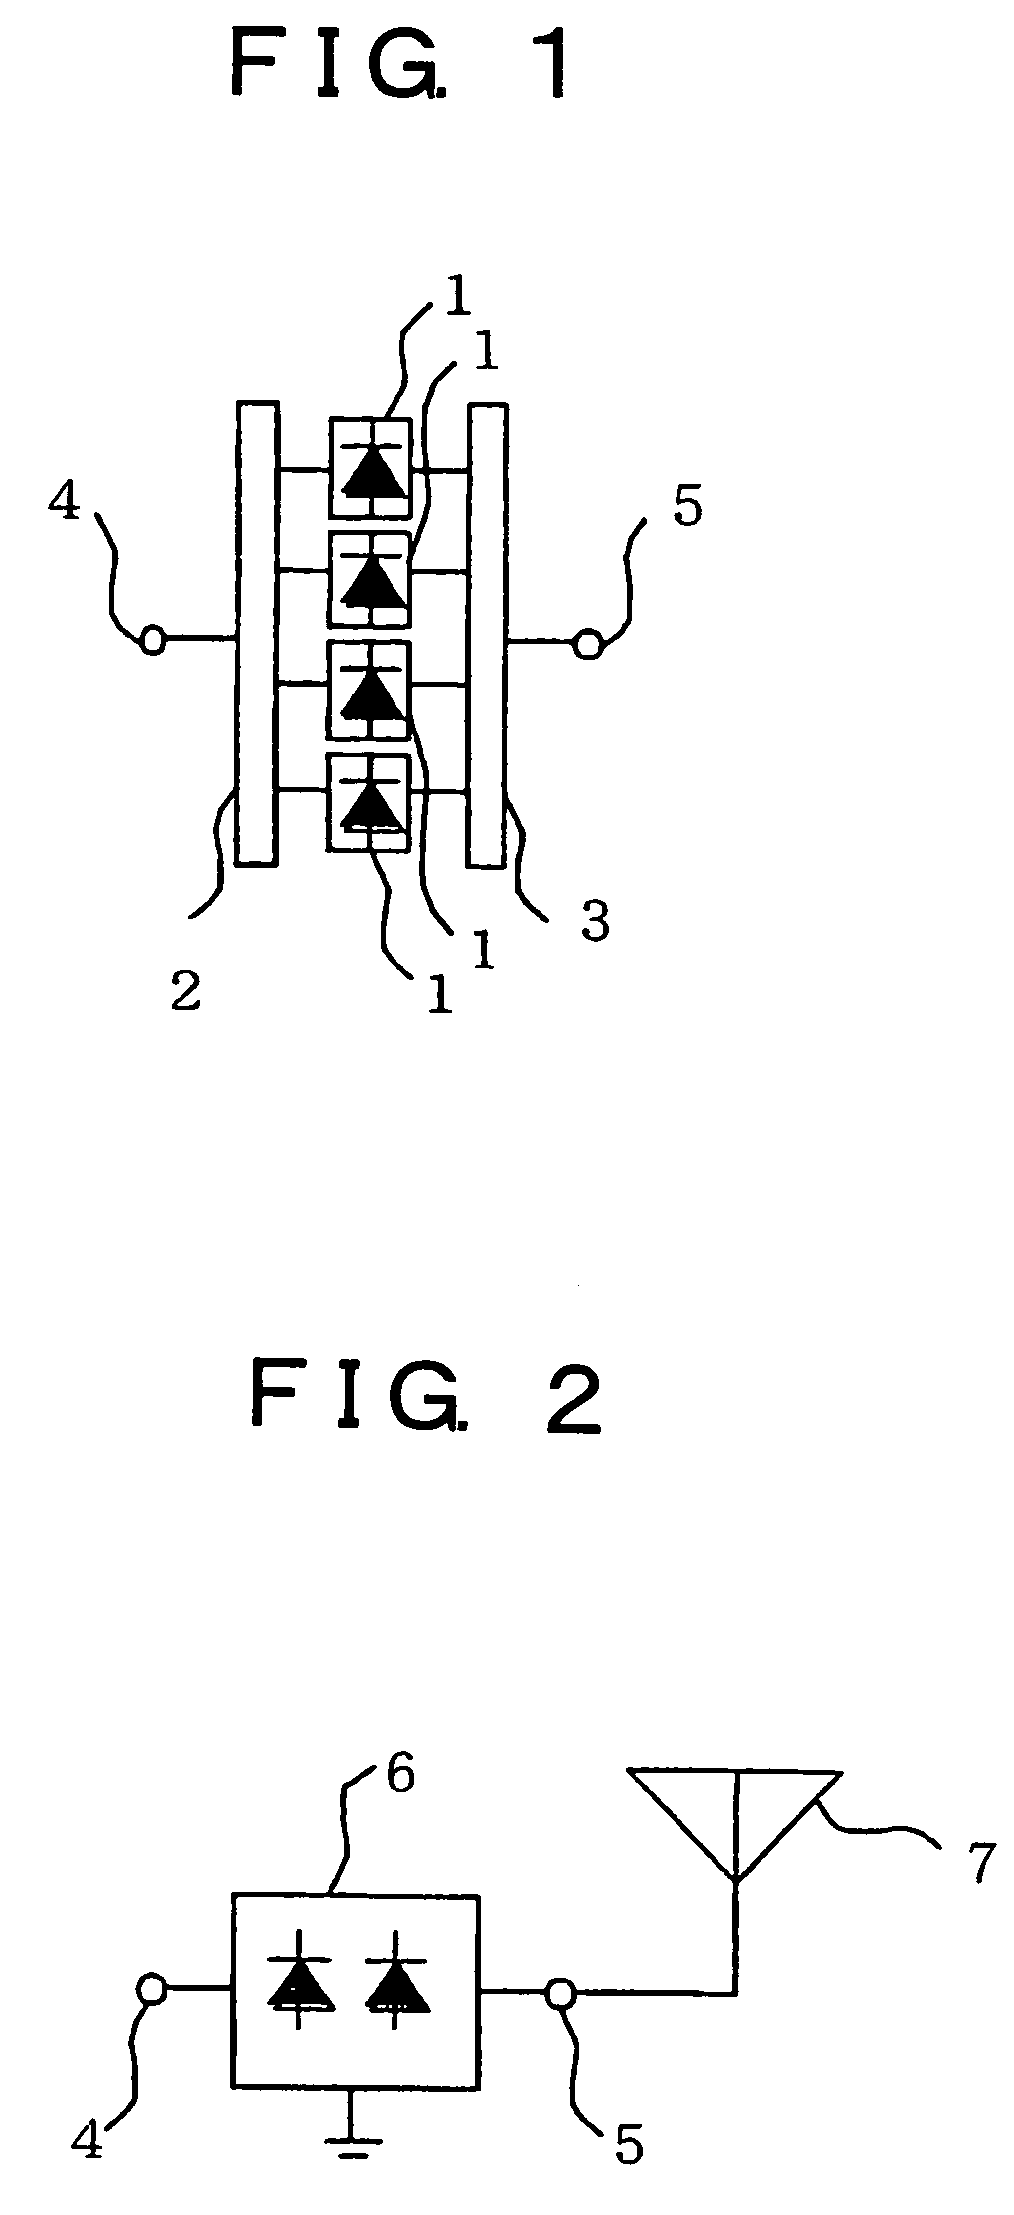 Photodiode array configured to increase electrical output power and optical microwave transmission system receiver utilizing the same